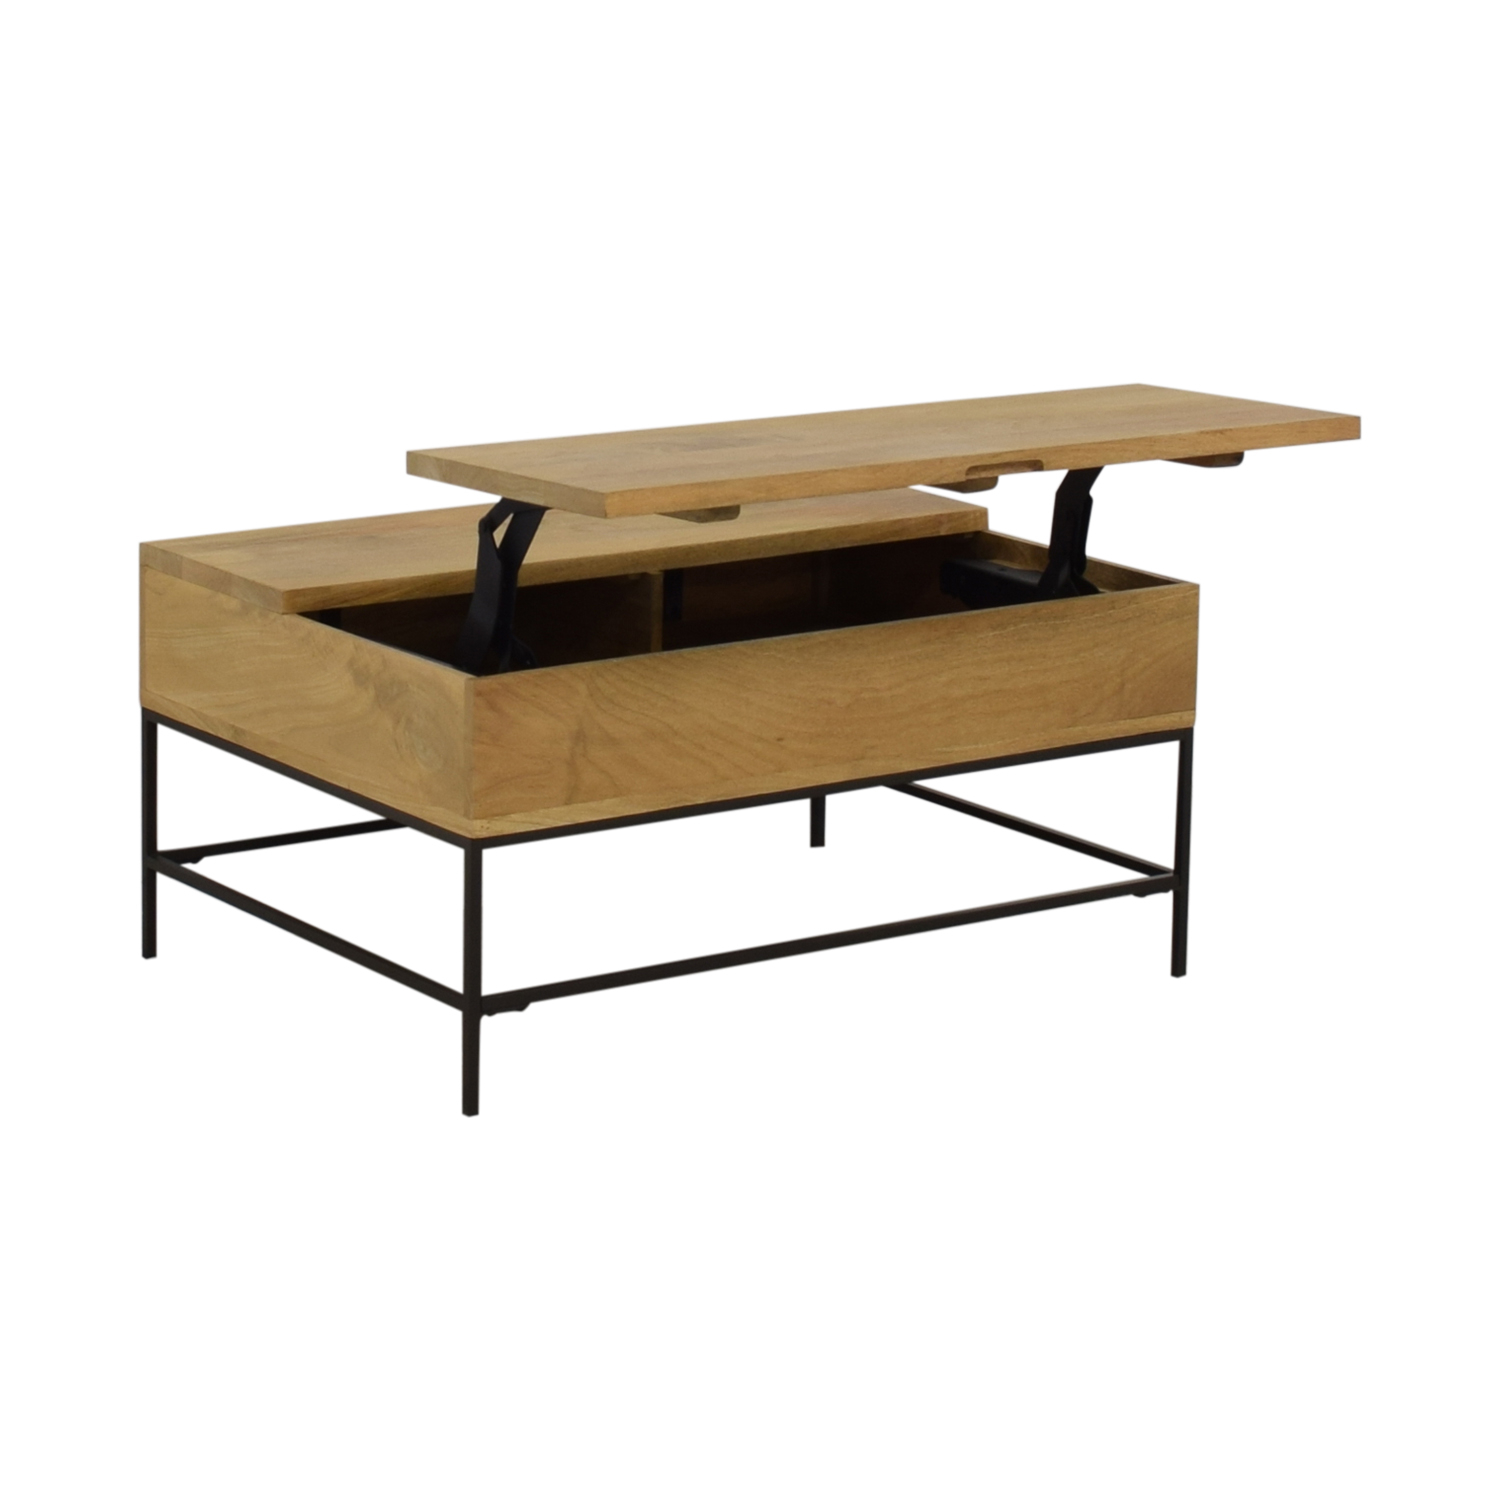 Origami Coffee Table West Elm 55 Off West Elm West Elm Industrial Storage Pop Up Coffee Table Tables